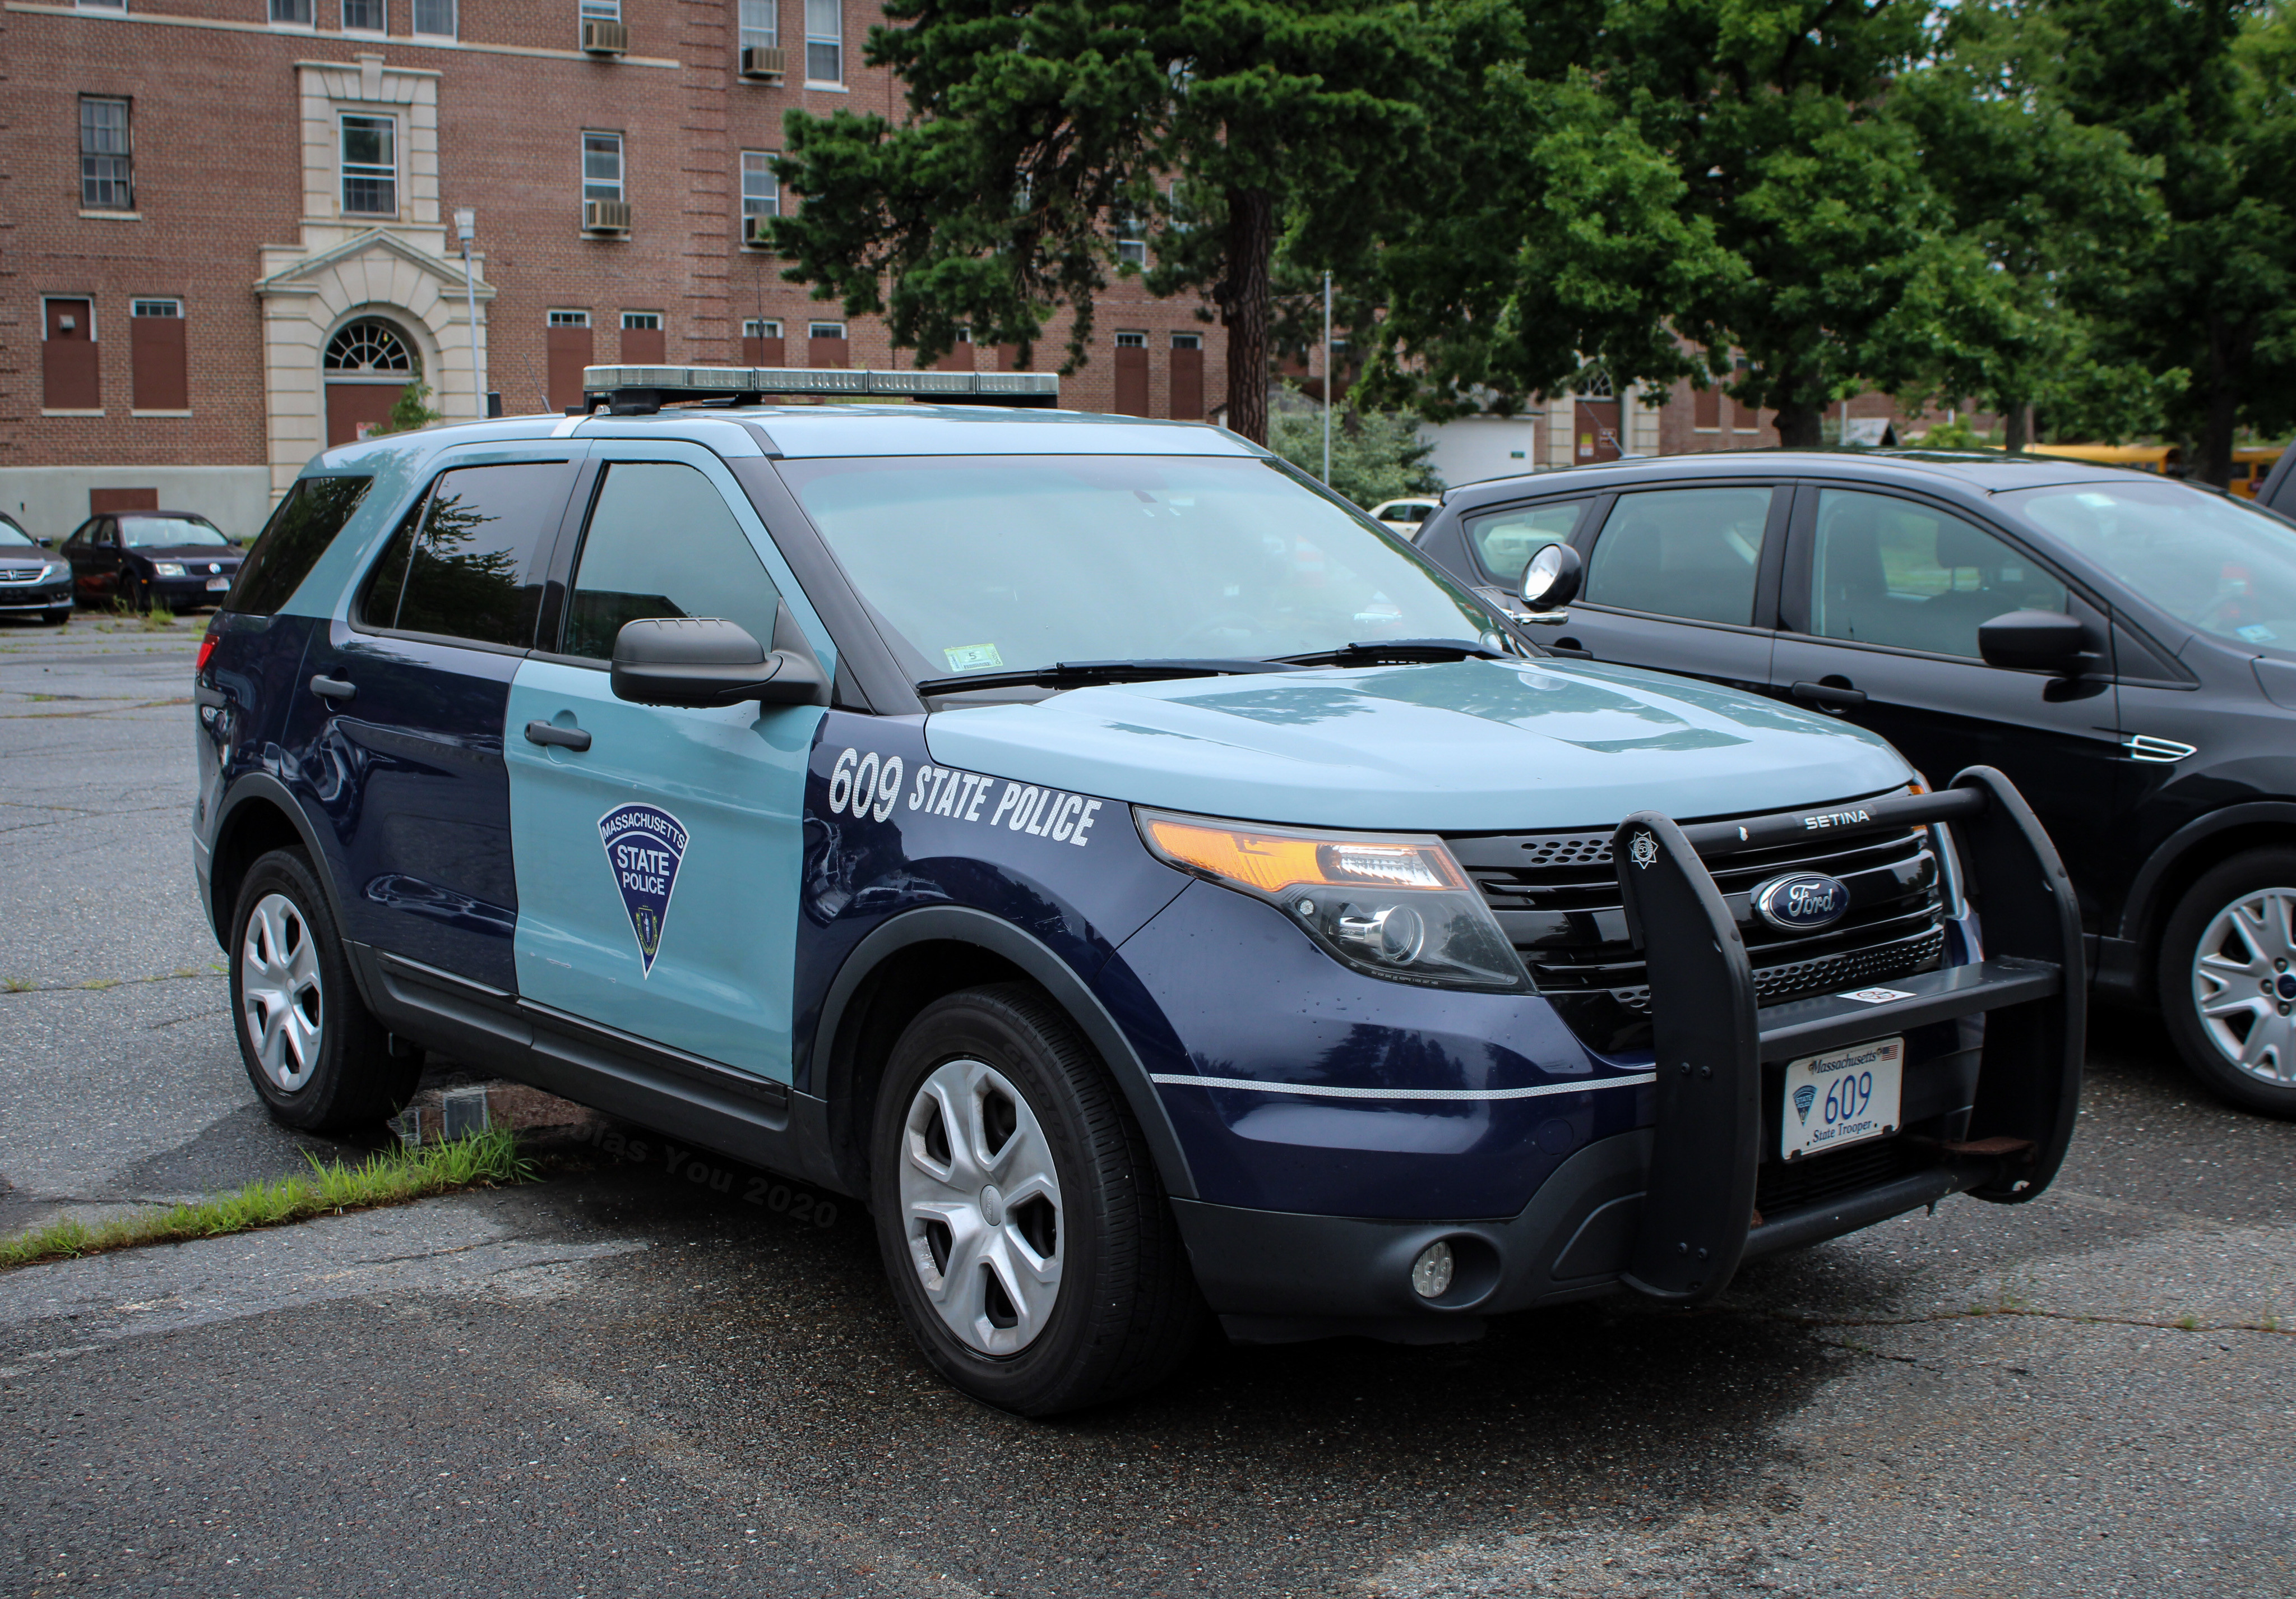 A photo  of Massachusetts State Police
            Cruiser 609, a 2014 Ford Police Interceptor Utility             taken by Nicholas You